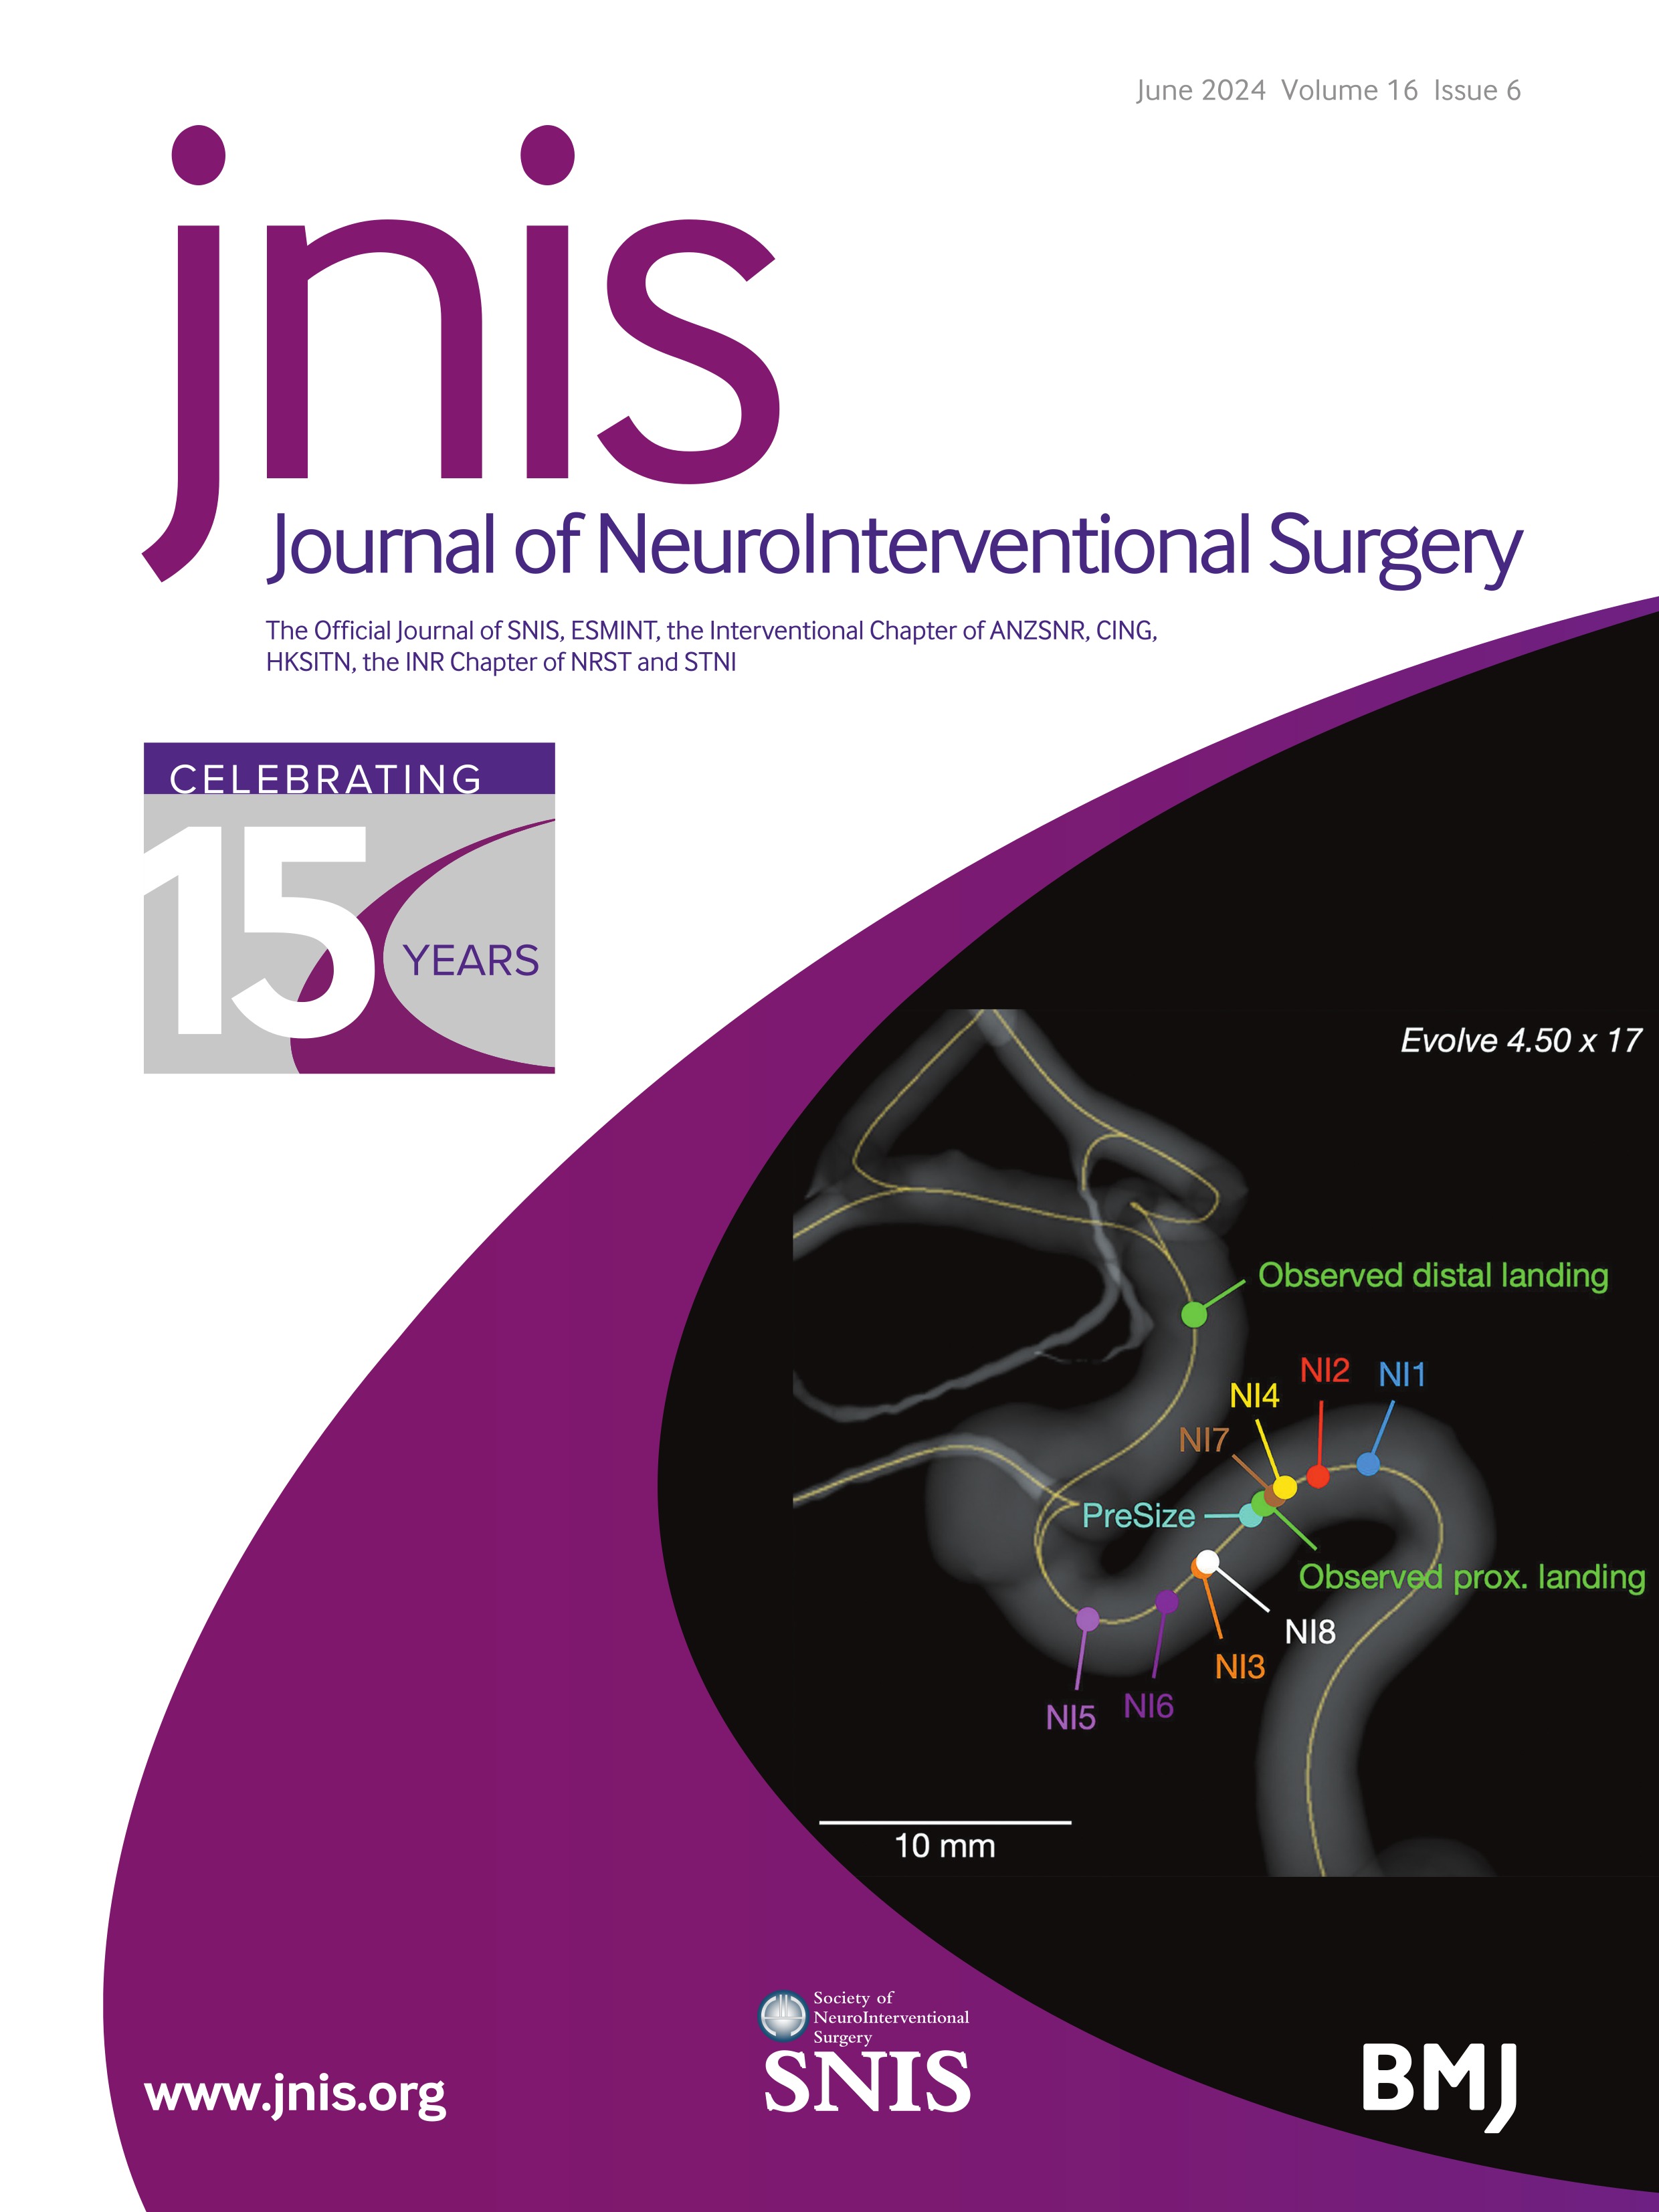 Preliminary experience with diffuse correlation spectroscopy in acute ischemic stroke neurointerventional procedures